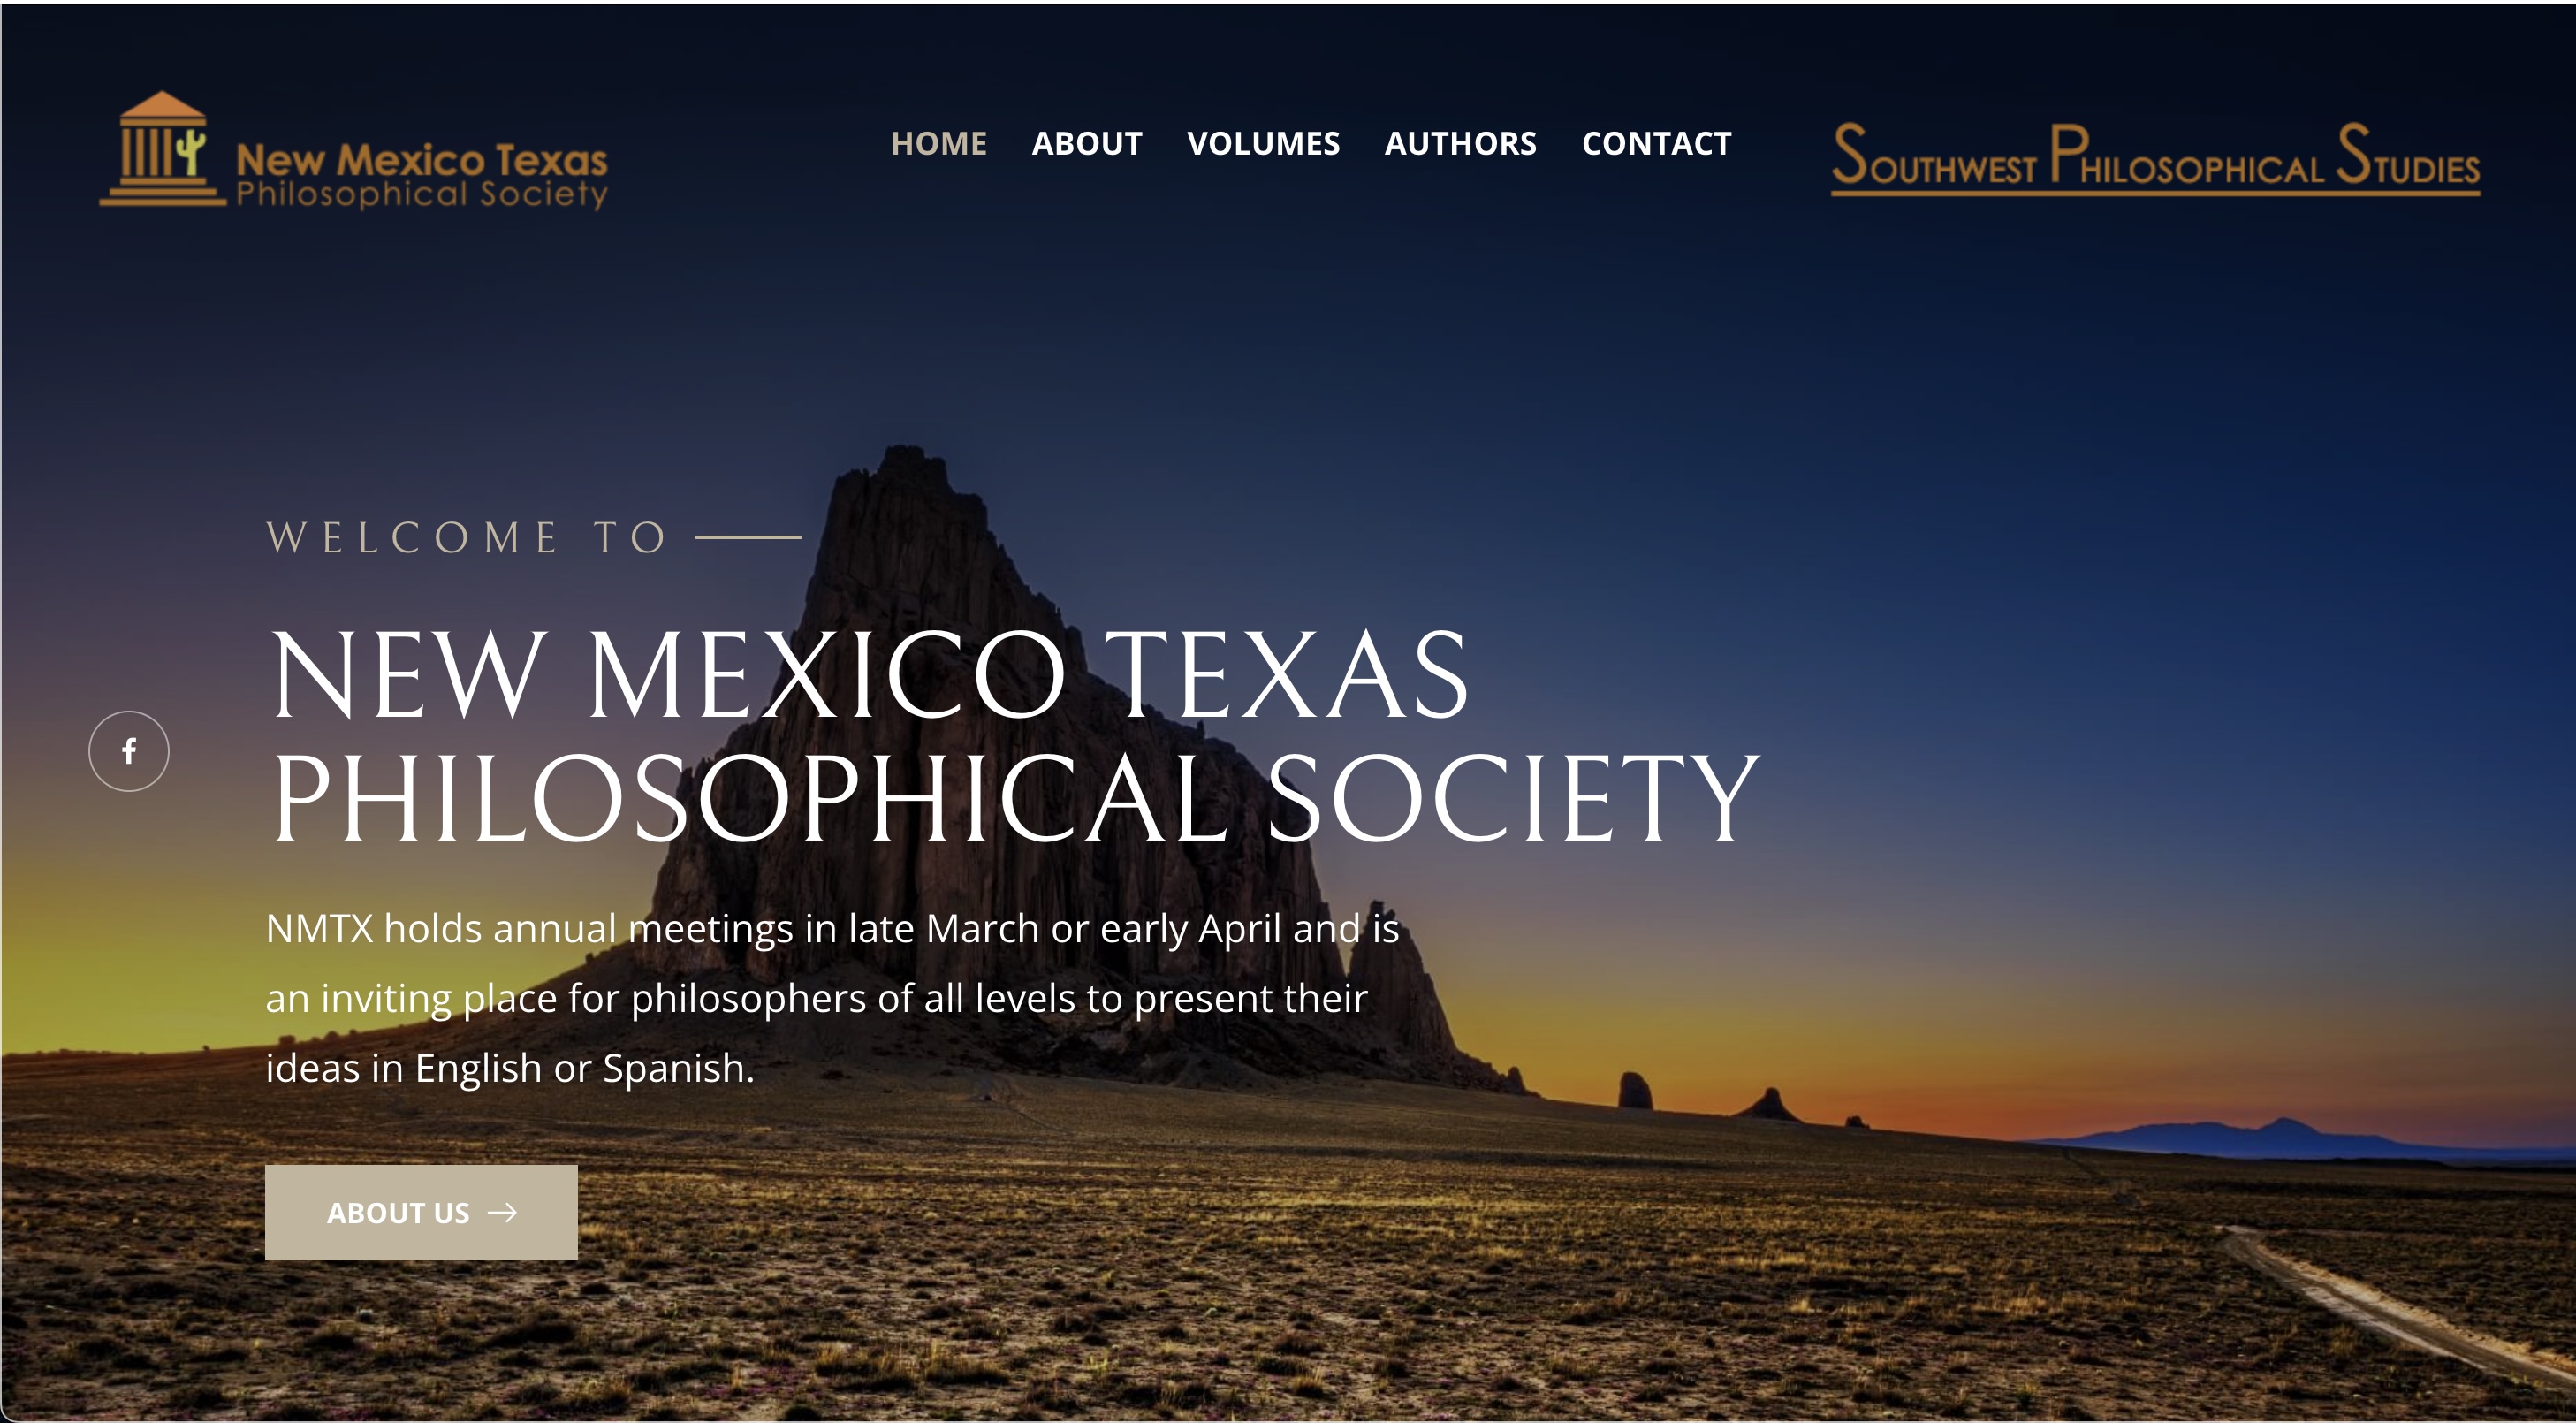 The UTRGV Department of Philosophy is hosting the 74th Annual Meeting of the New Mexico Texas Philosophical Society on the Brownsville campus on April 5th and 6th!